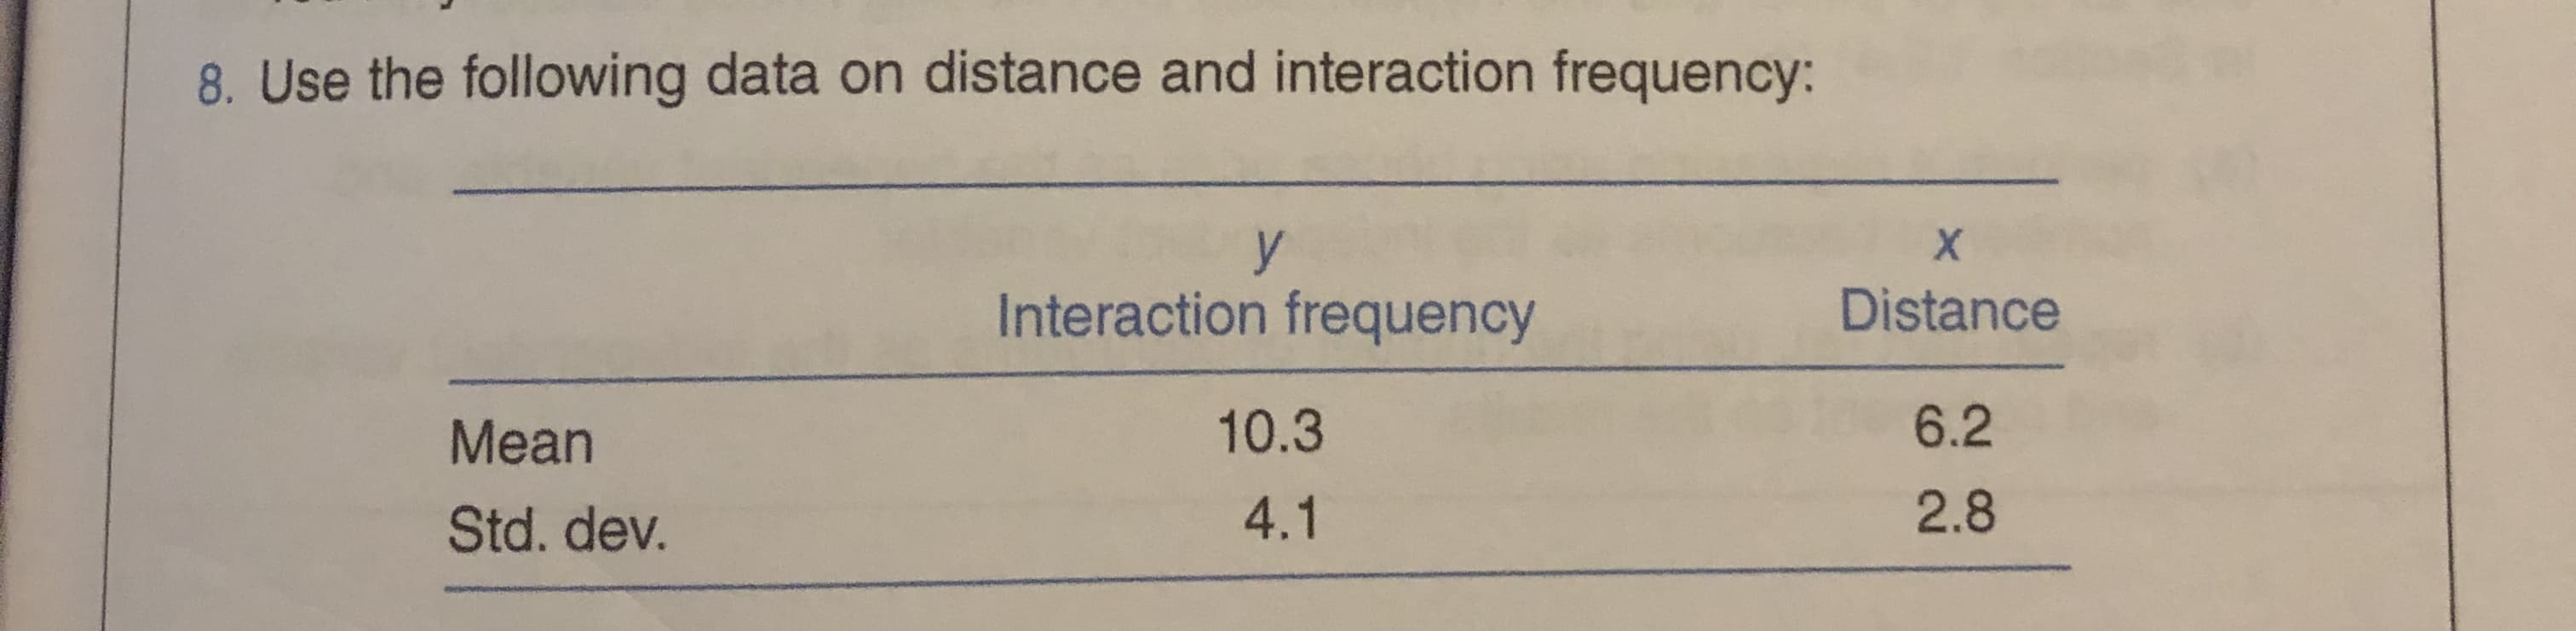 8. Use the following data on distance and interaction frequency:
Interaction frequency
Distance
Mean
10.3
6.2
Std. dev.
4.1
2.8
